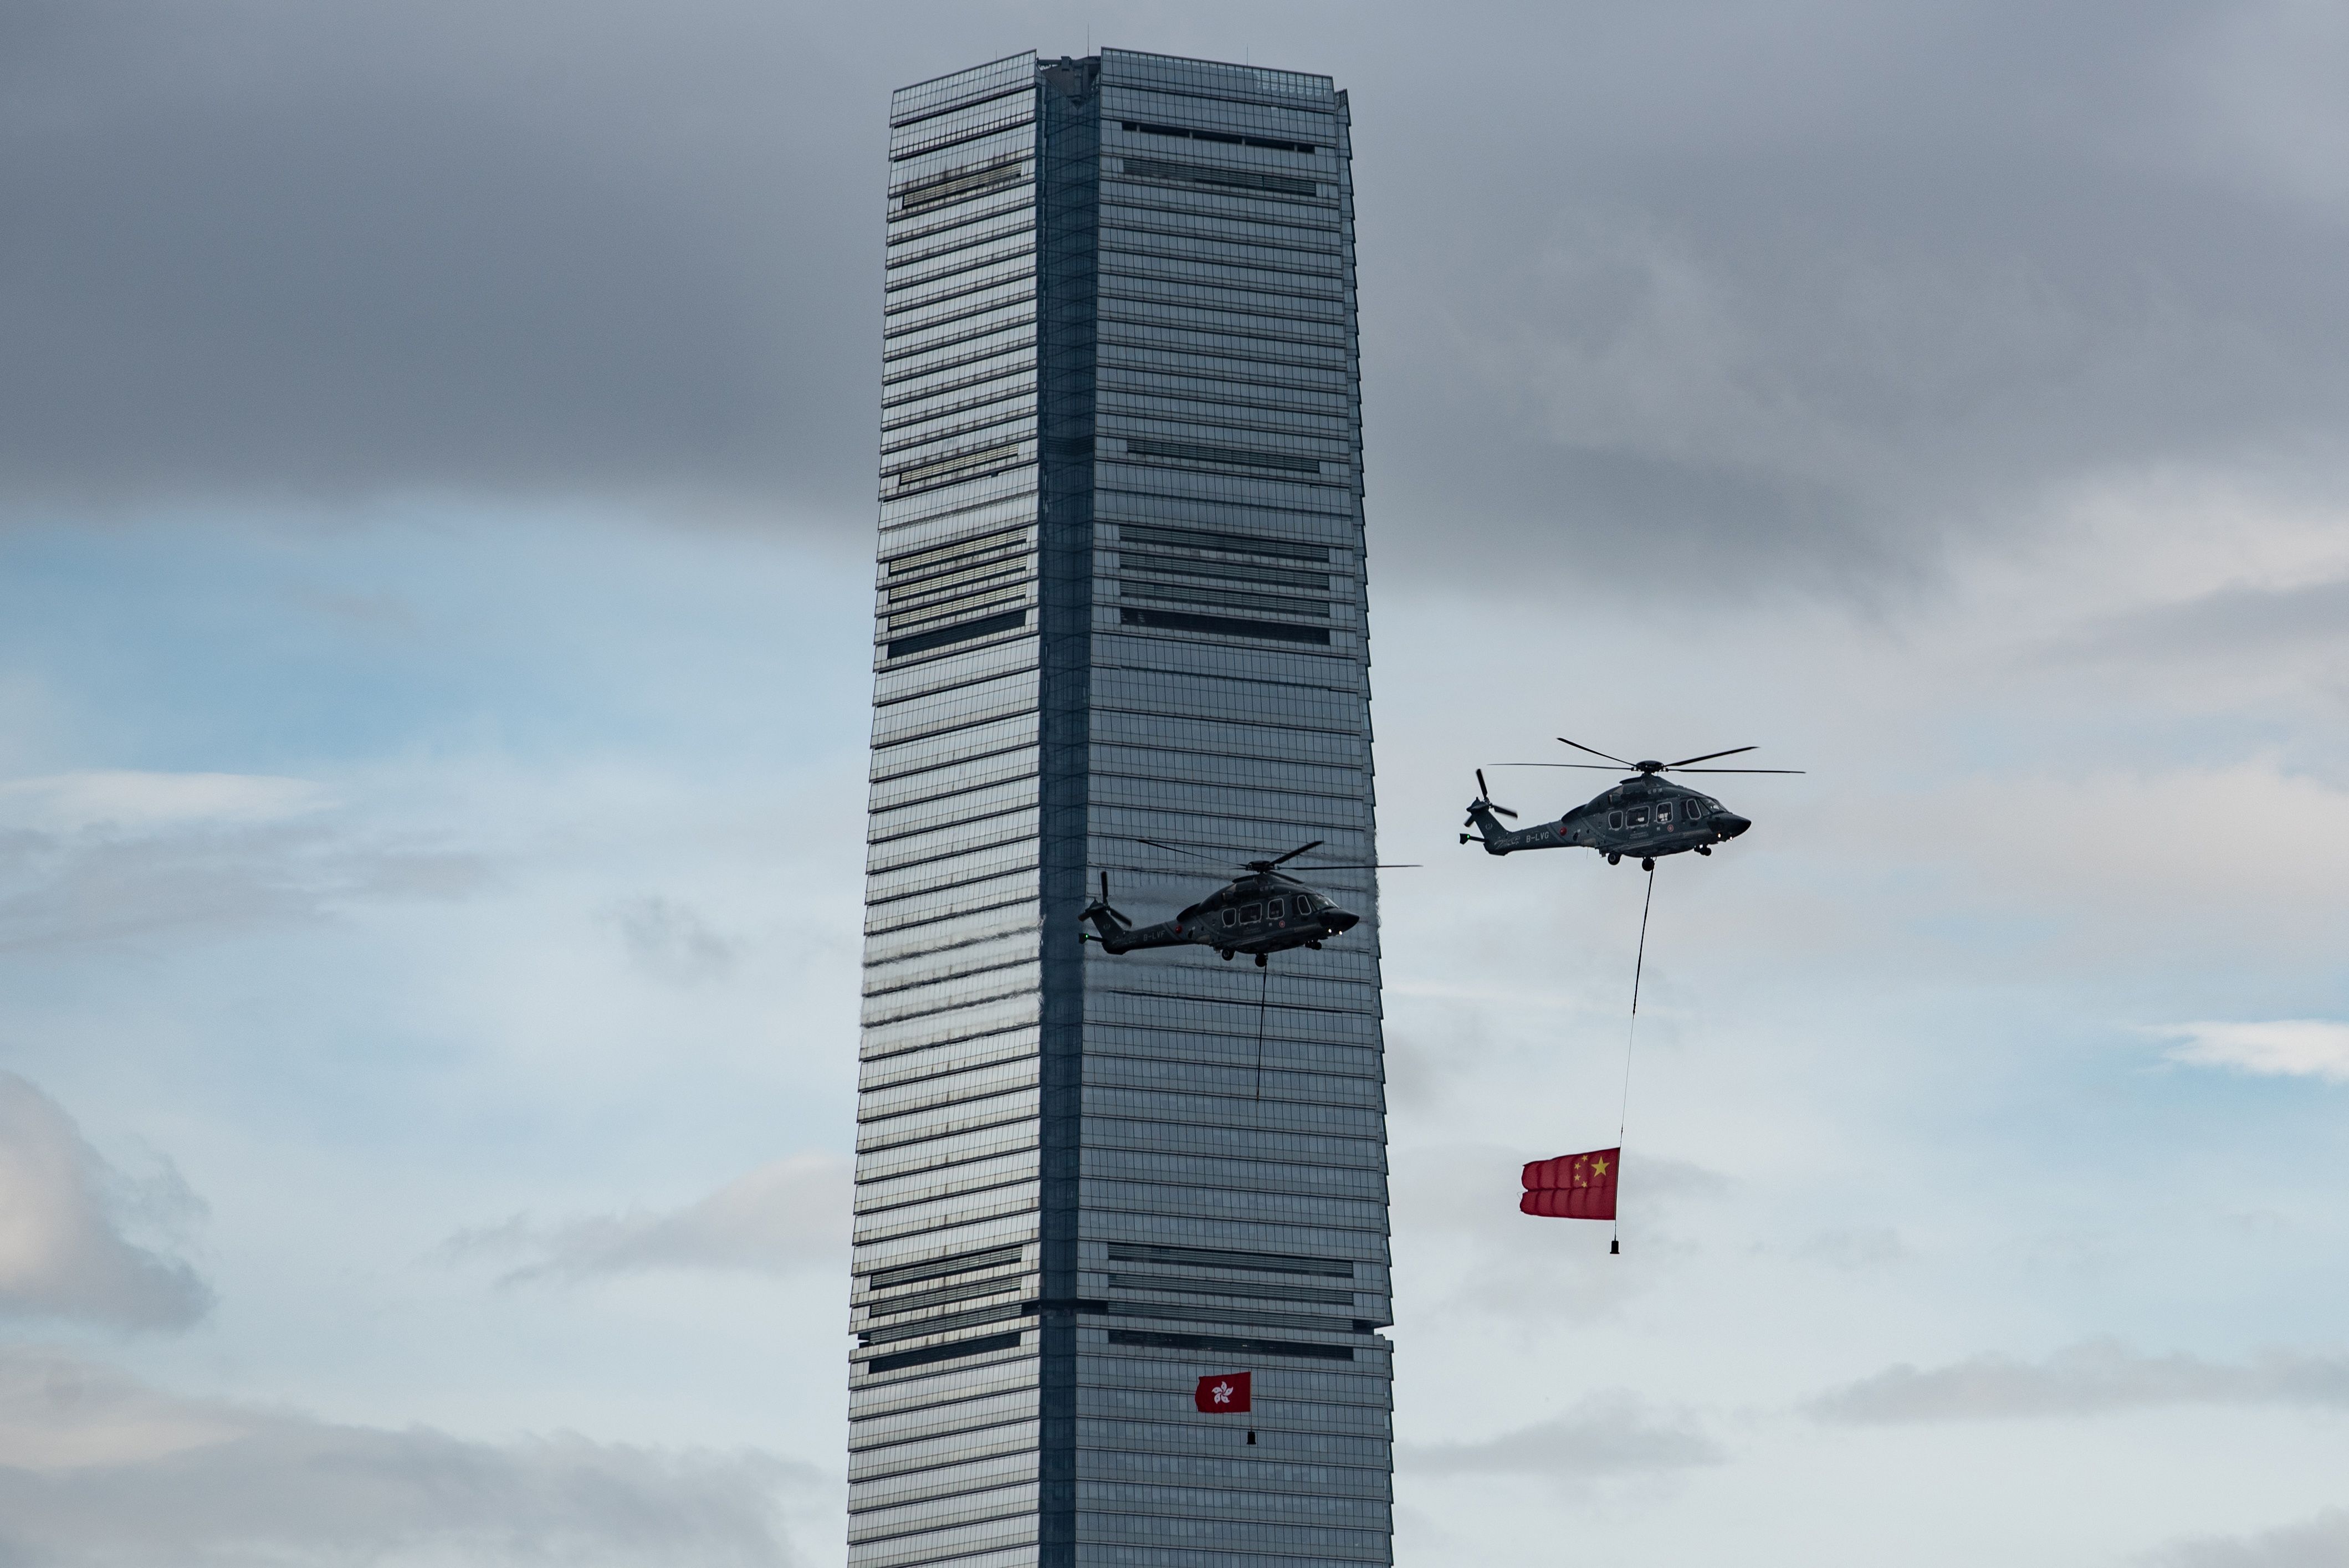 elicopters fly across Victoria Harbour carrying a Hong Kong (L) and China (R) flag during the annual flag raising ceremony to mark the 22nd anniversary of the city's handover from Britain to China.